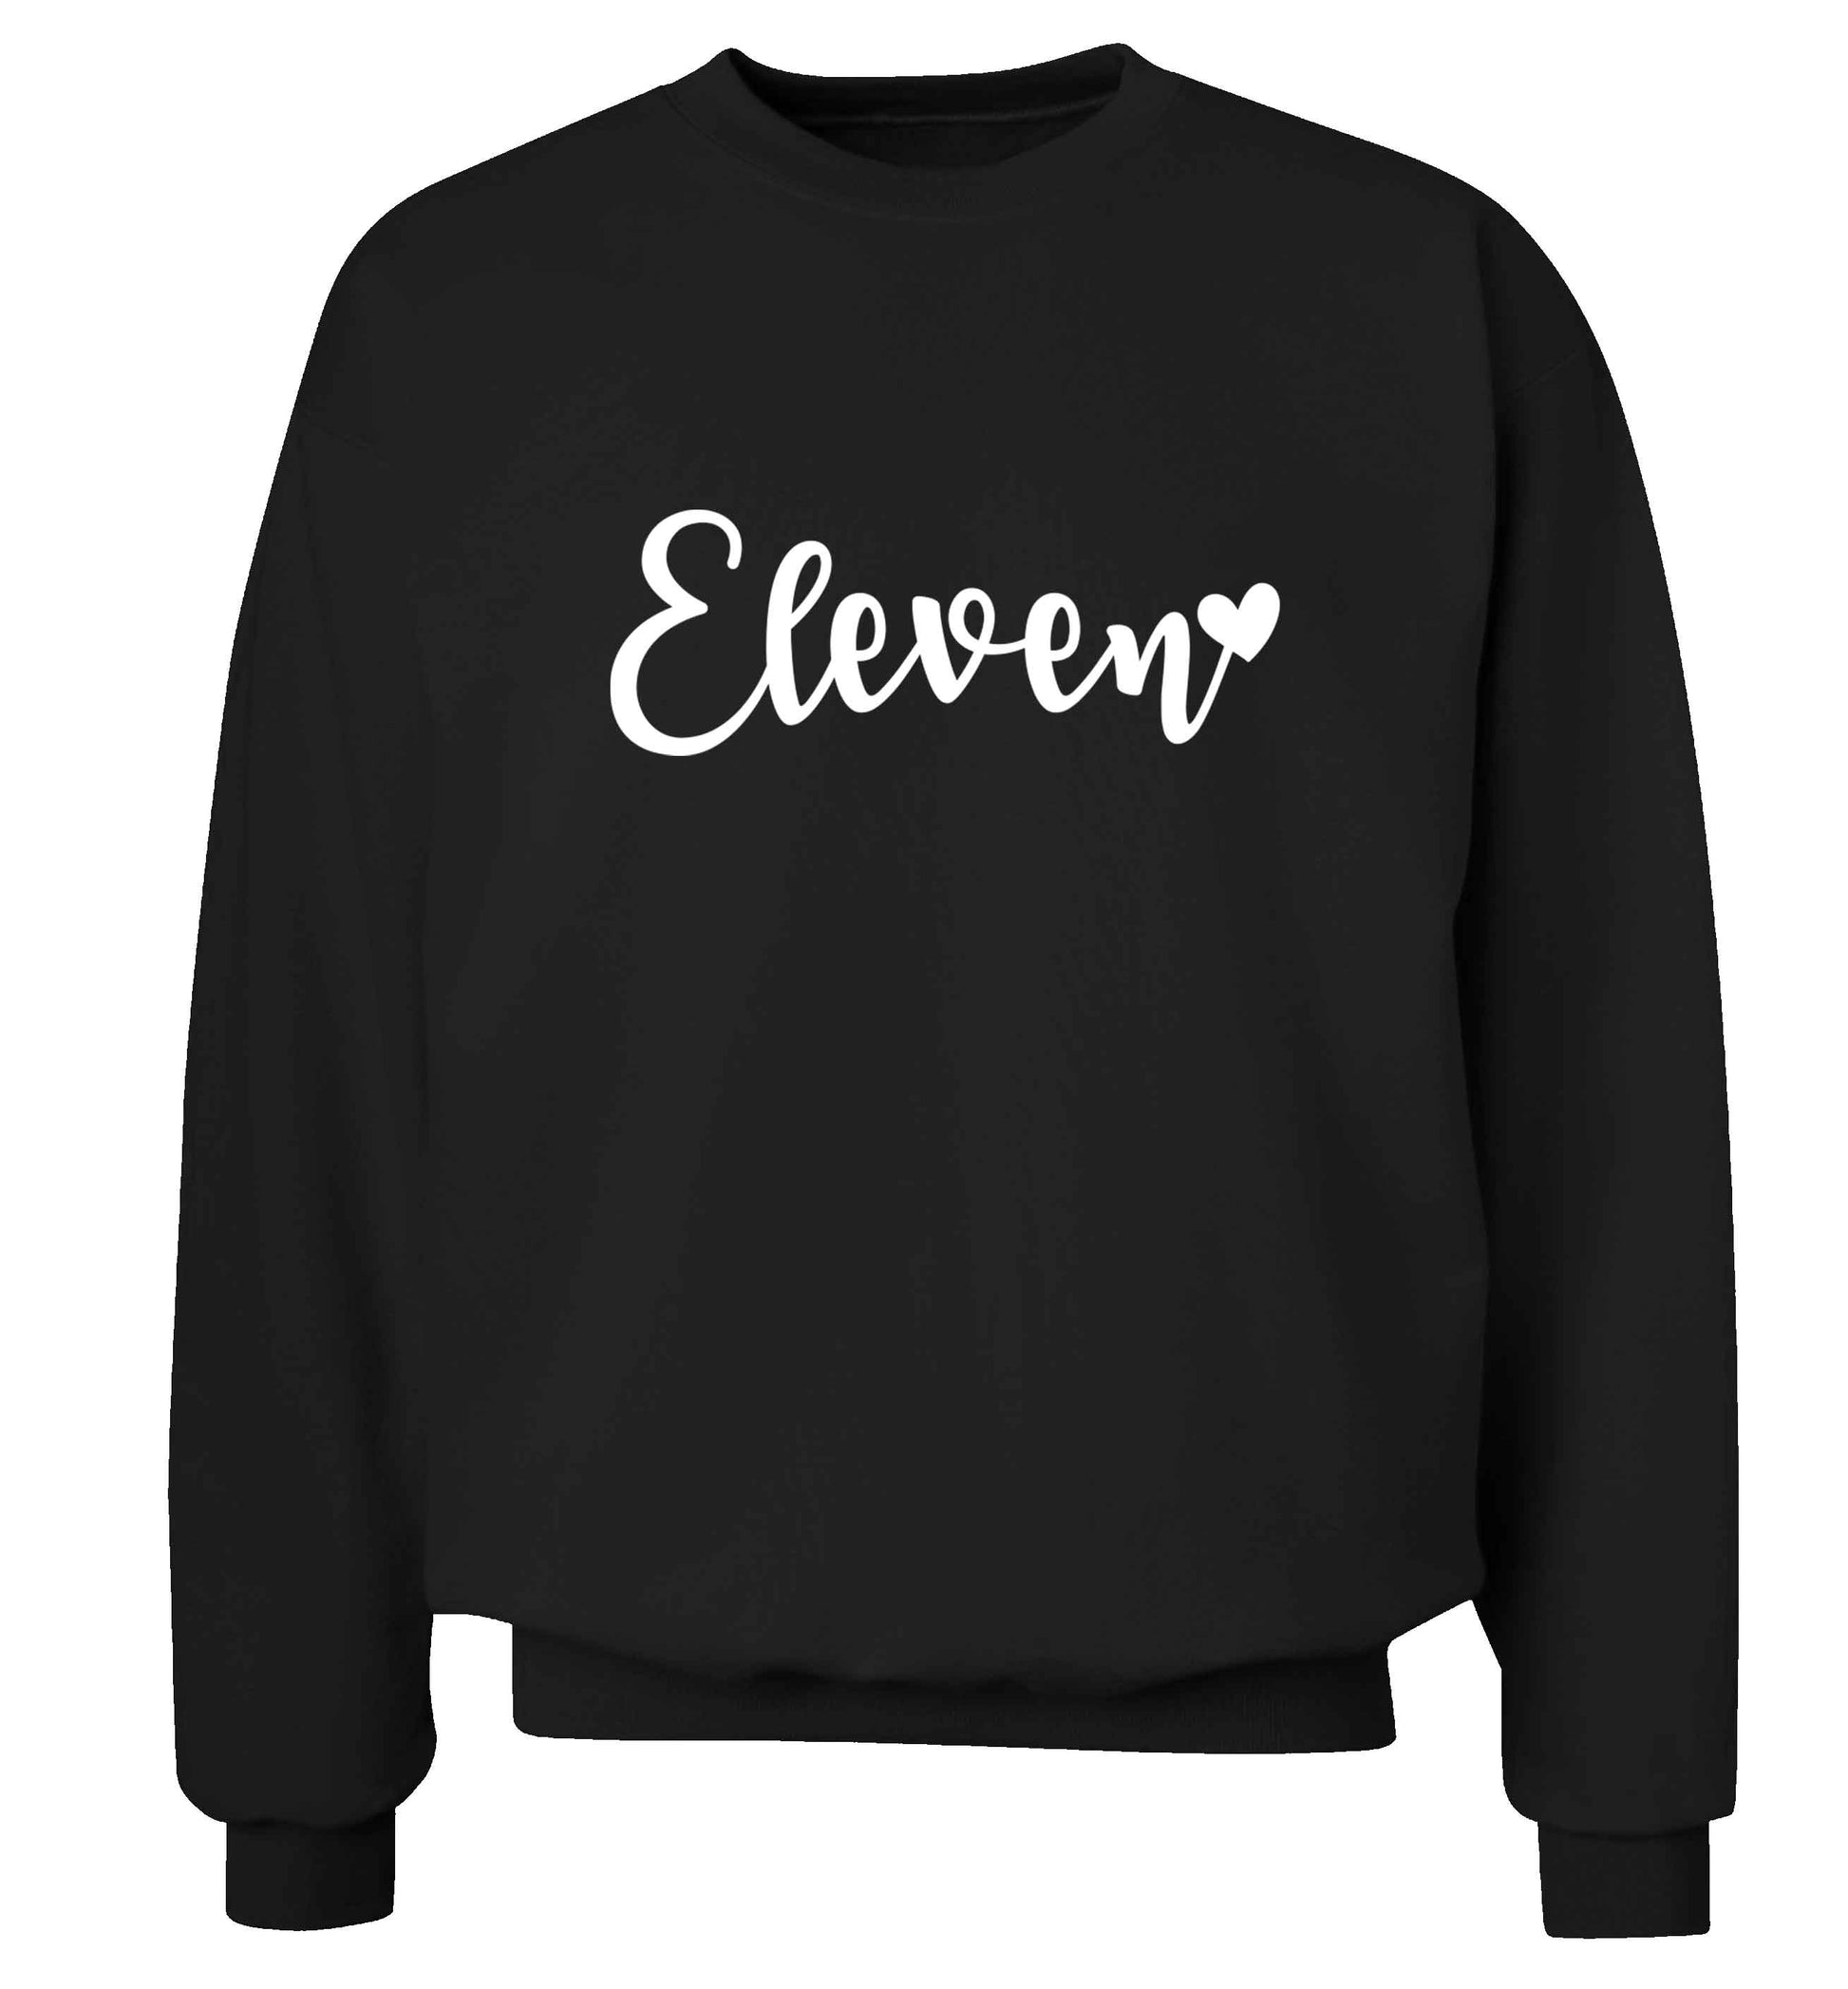 Eleven and heart! adult's unisex black sweater 2XL